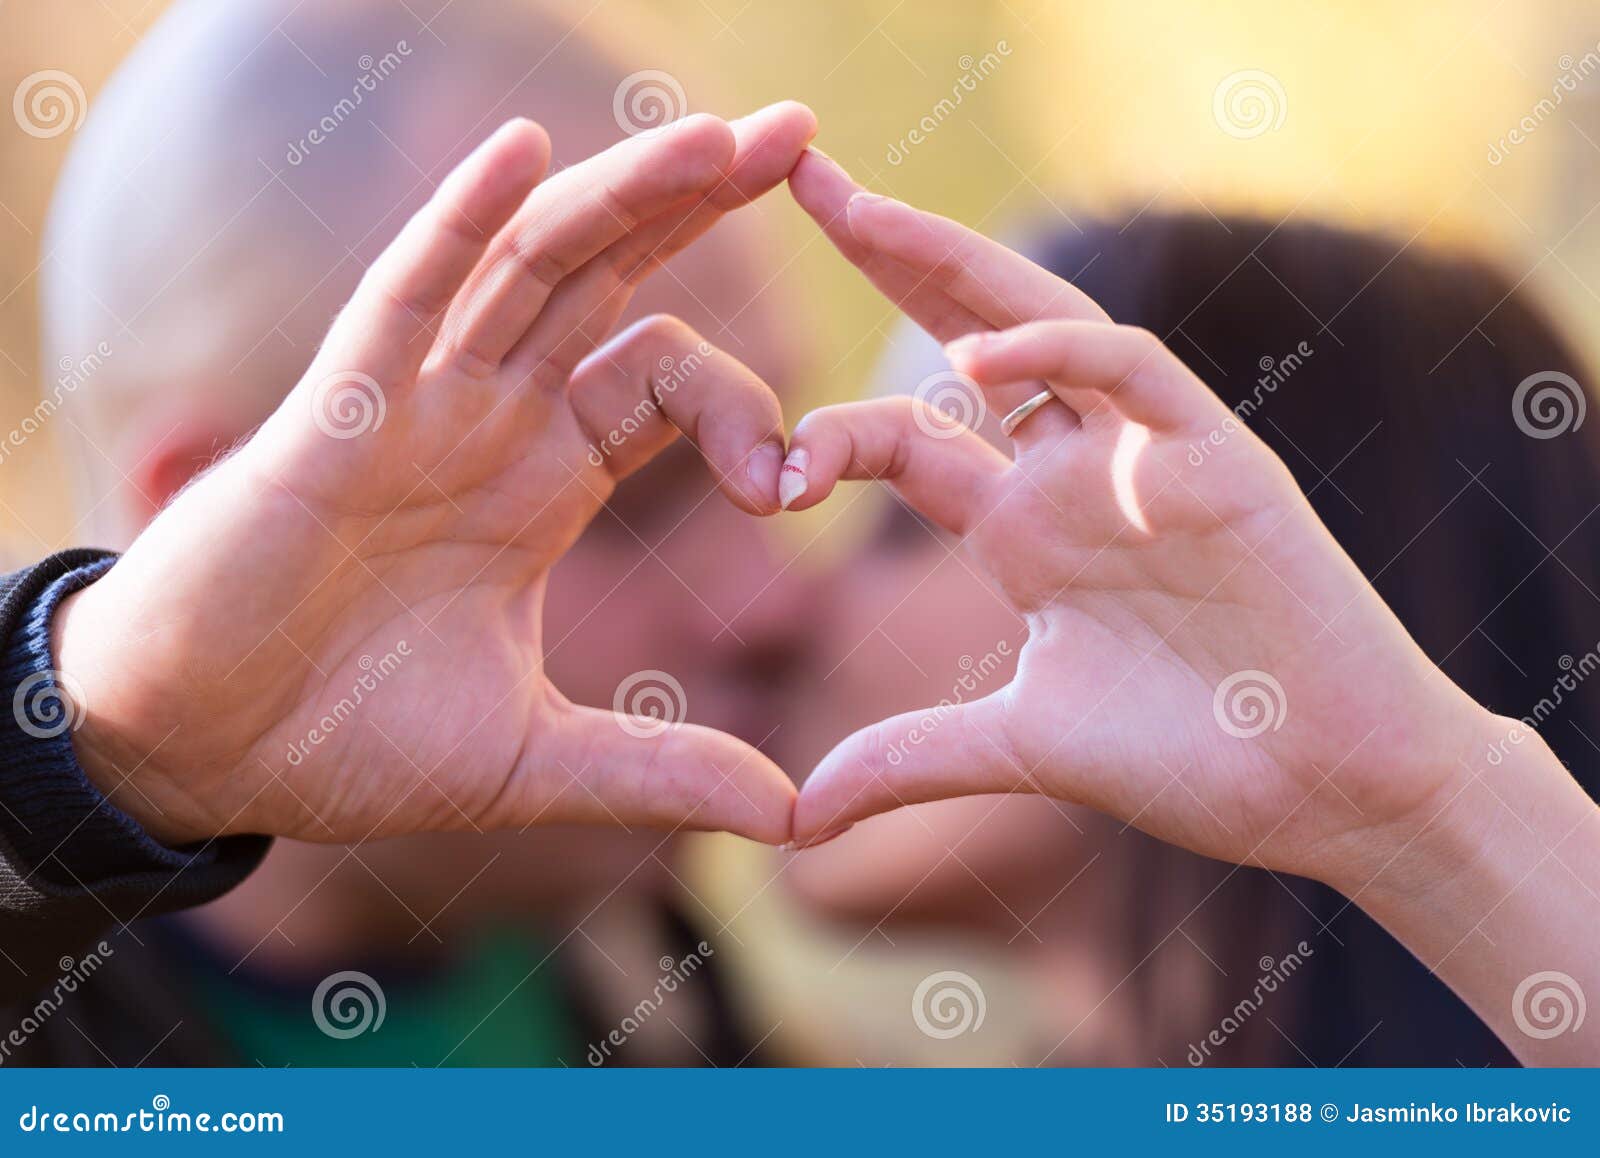 Hands Forming Heart Shape Stock Photo Image Of Finger 35193188